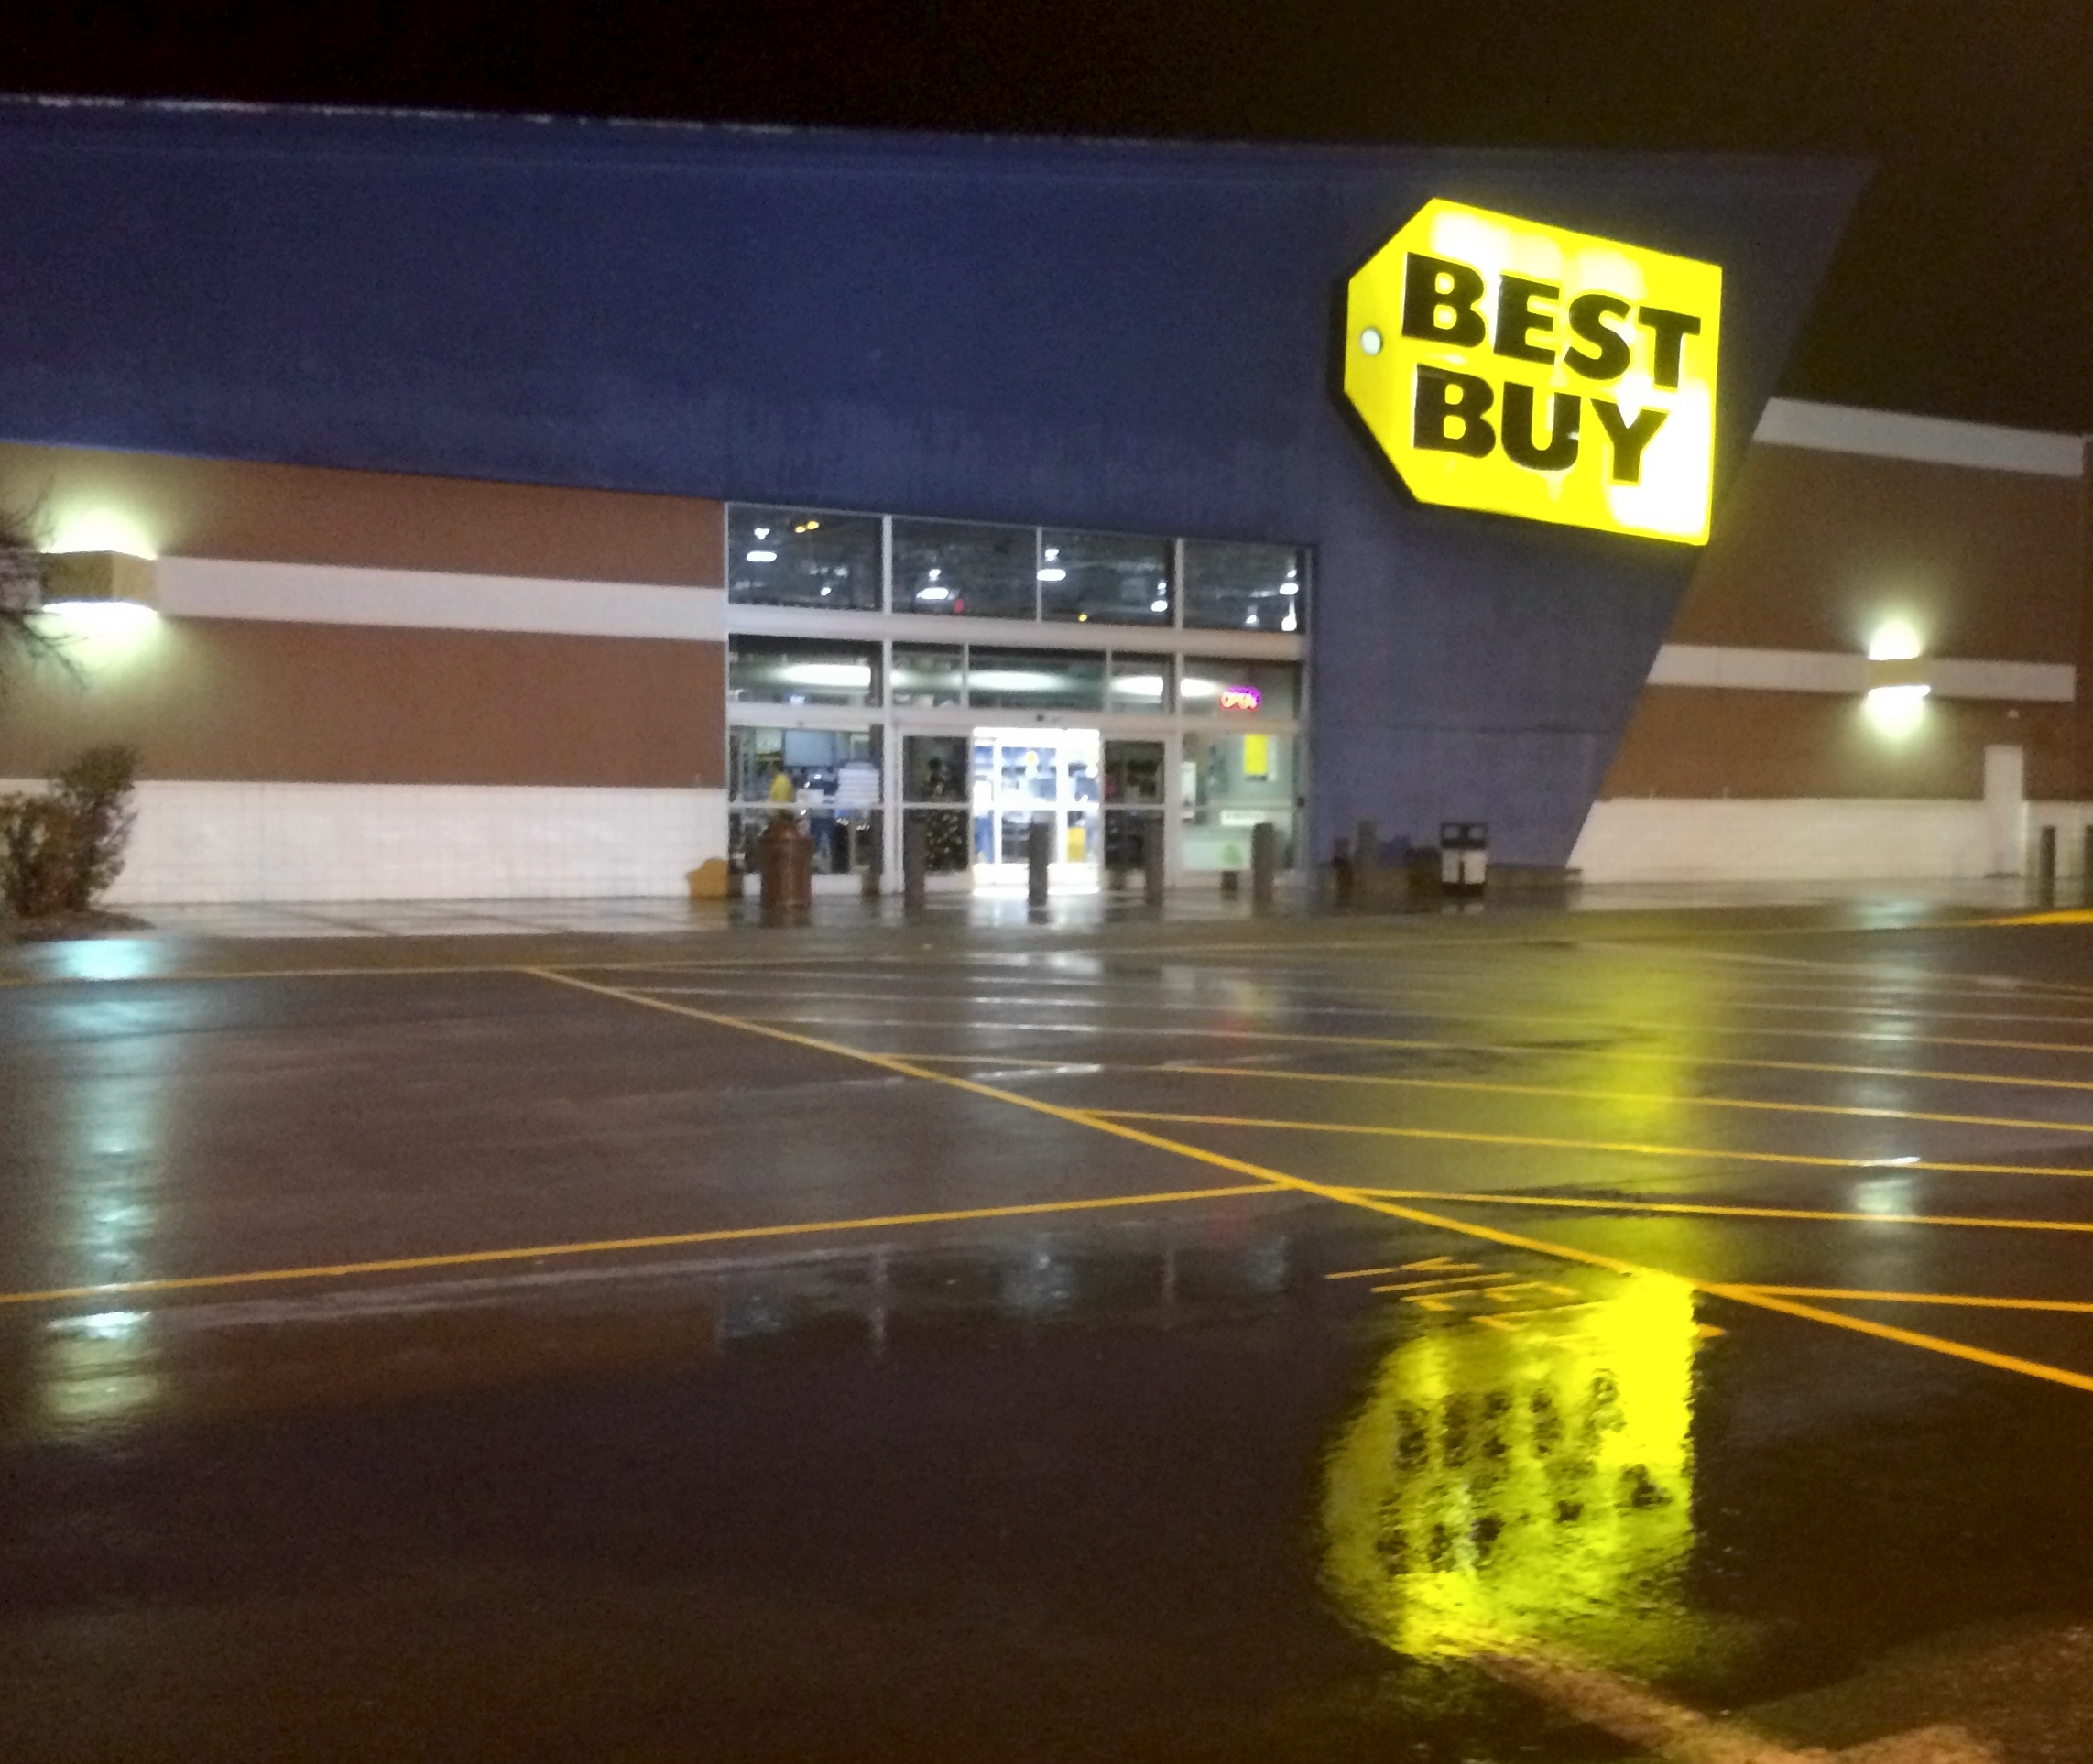 Check out the Best Buy Black Friday 2014 ad highlights.